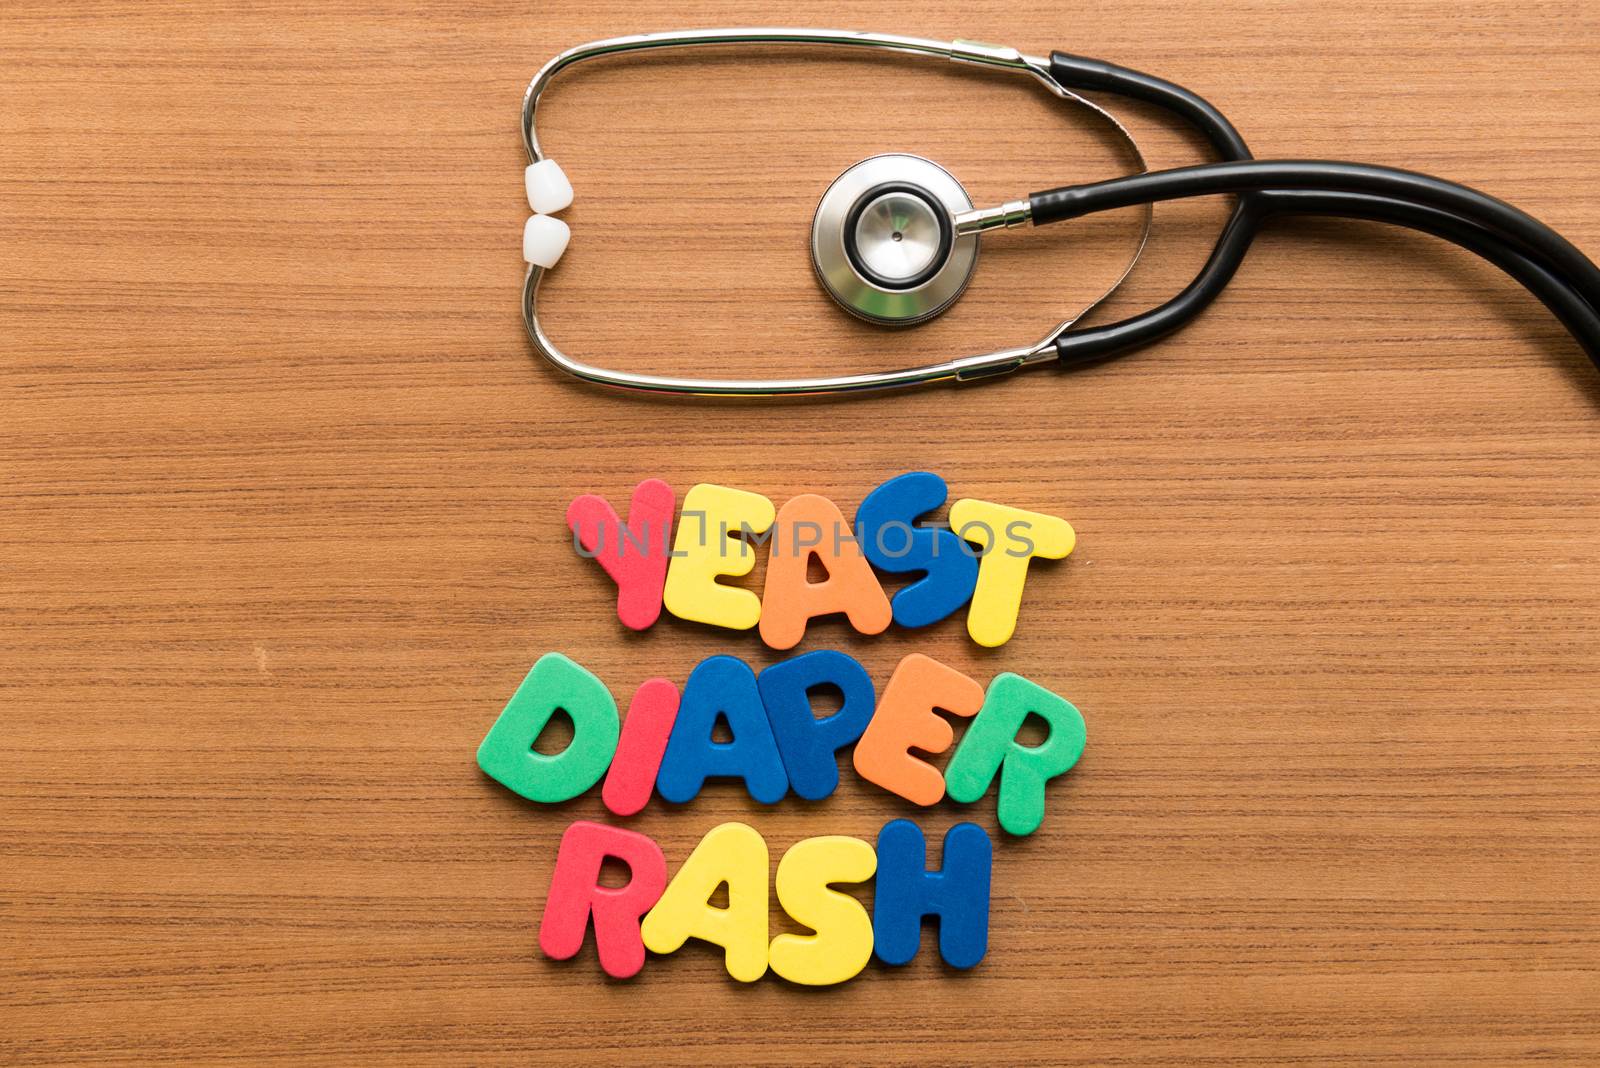 yeast diaper rash colorful word with stethoscope by sohel.parvez@hotmail.com